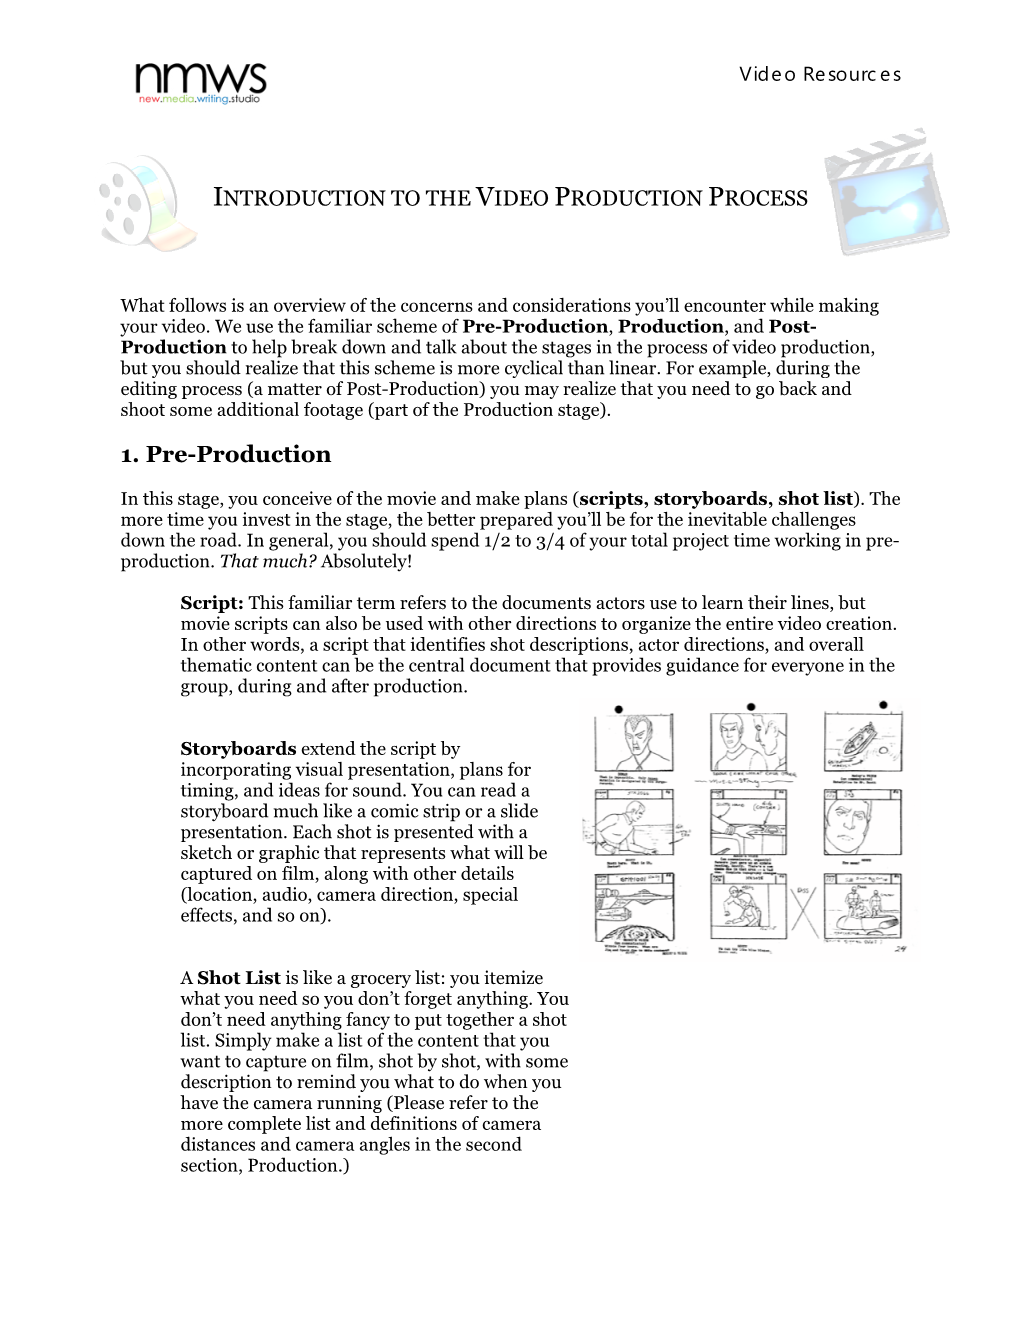 Introduction to the Video Production Process